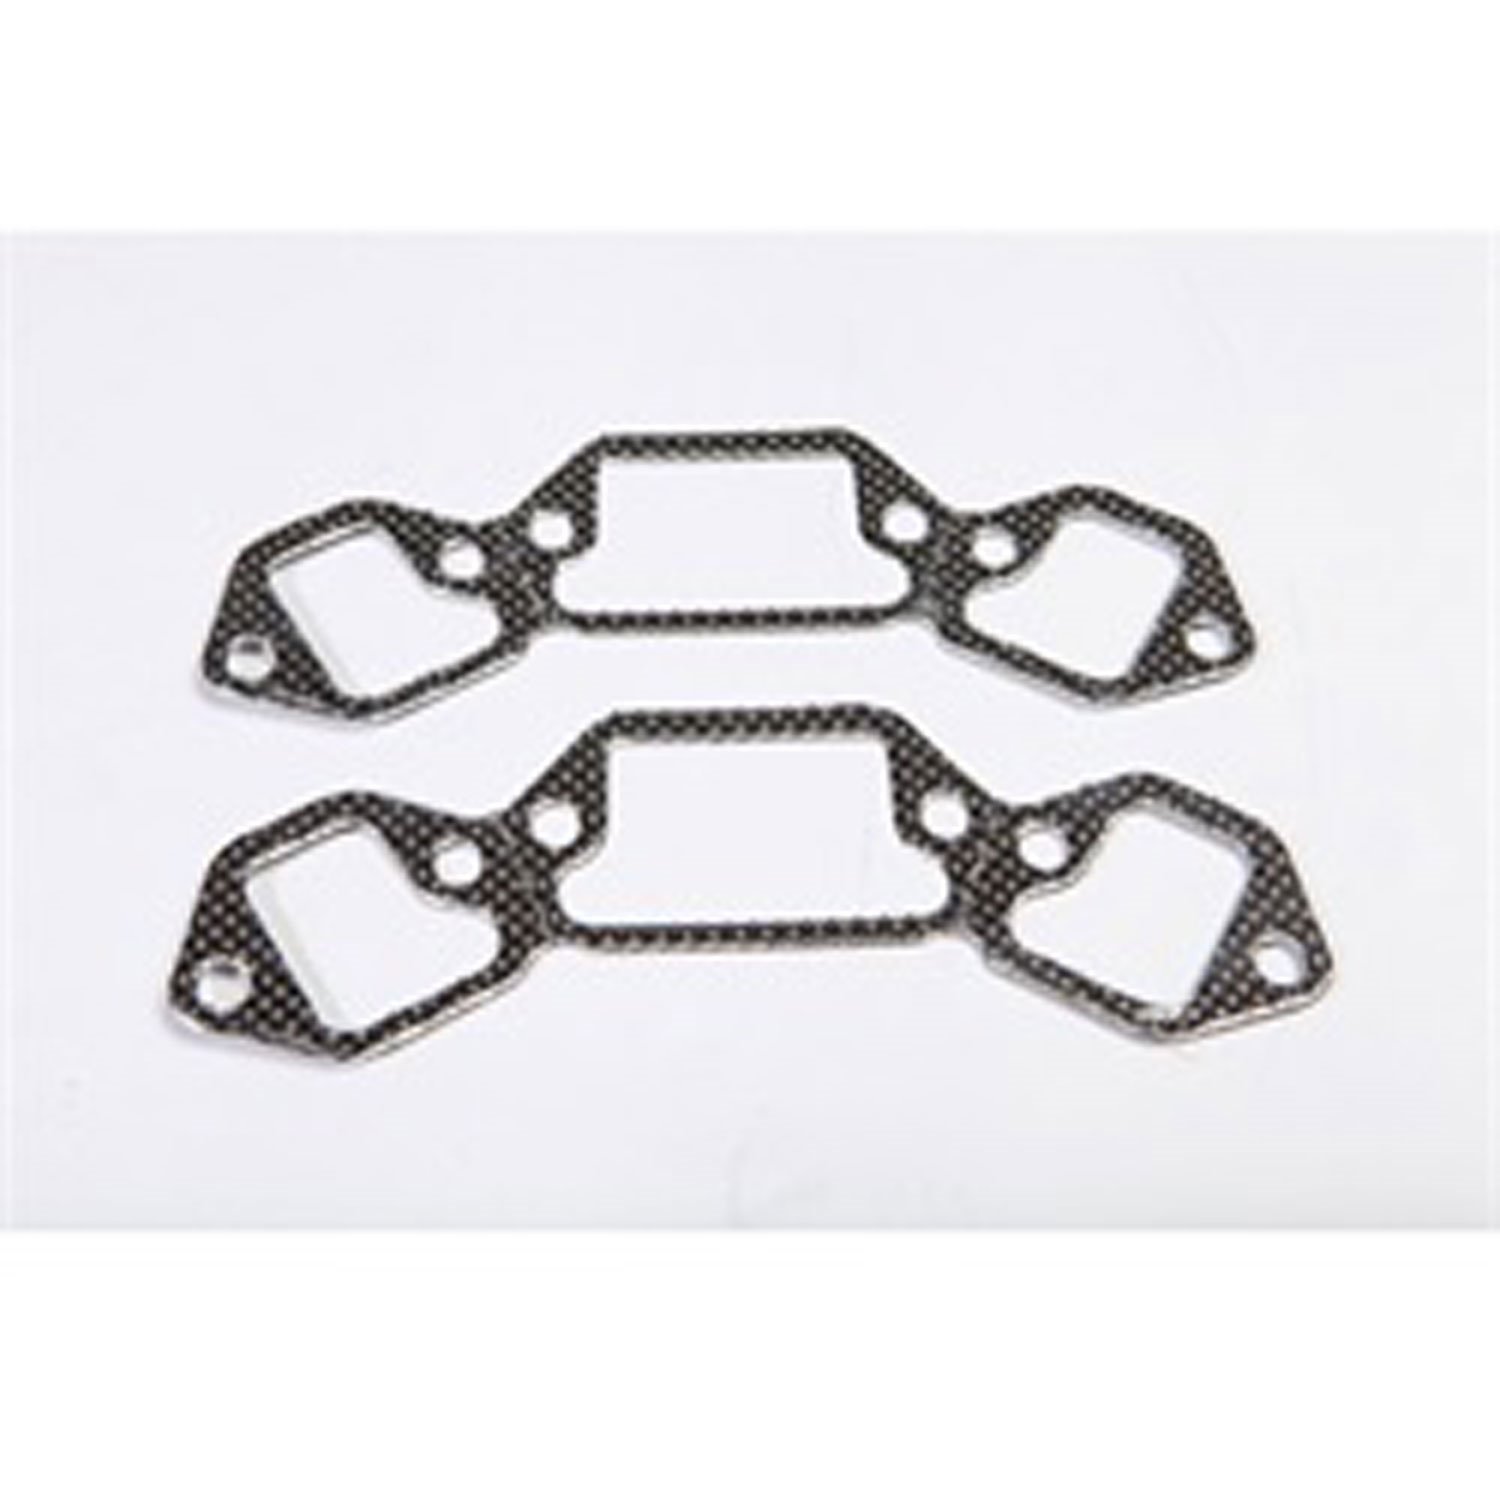 pair of replacement exhaust manifold gaskets from Omix-ADA fit 72-91 Jeep CJ and SJ models with